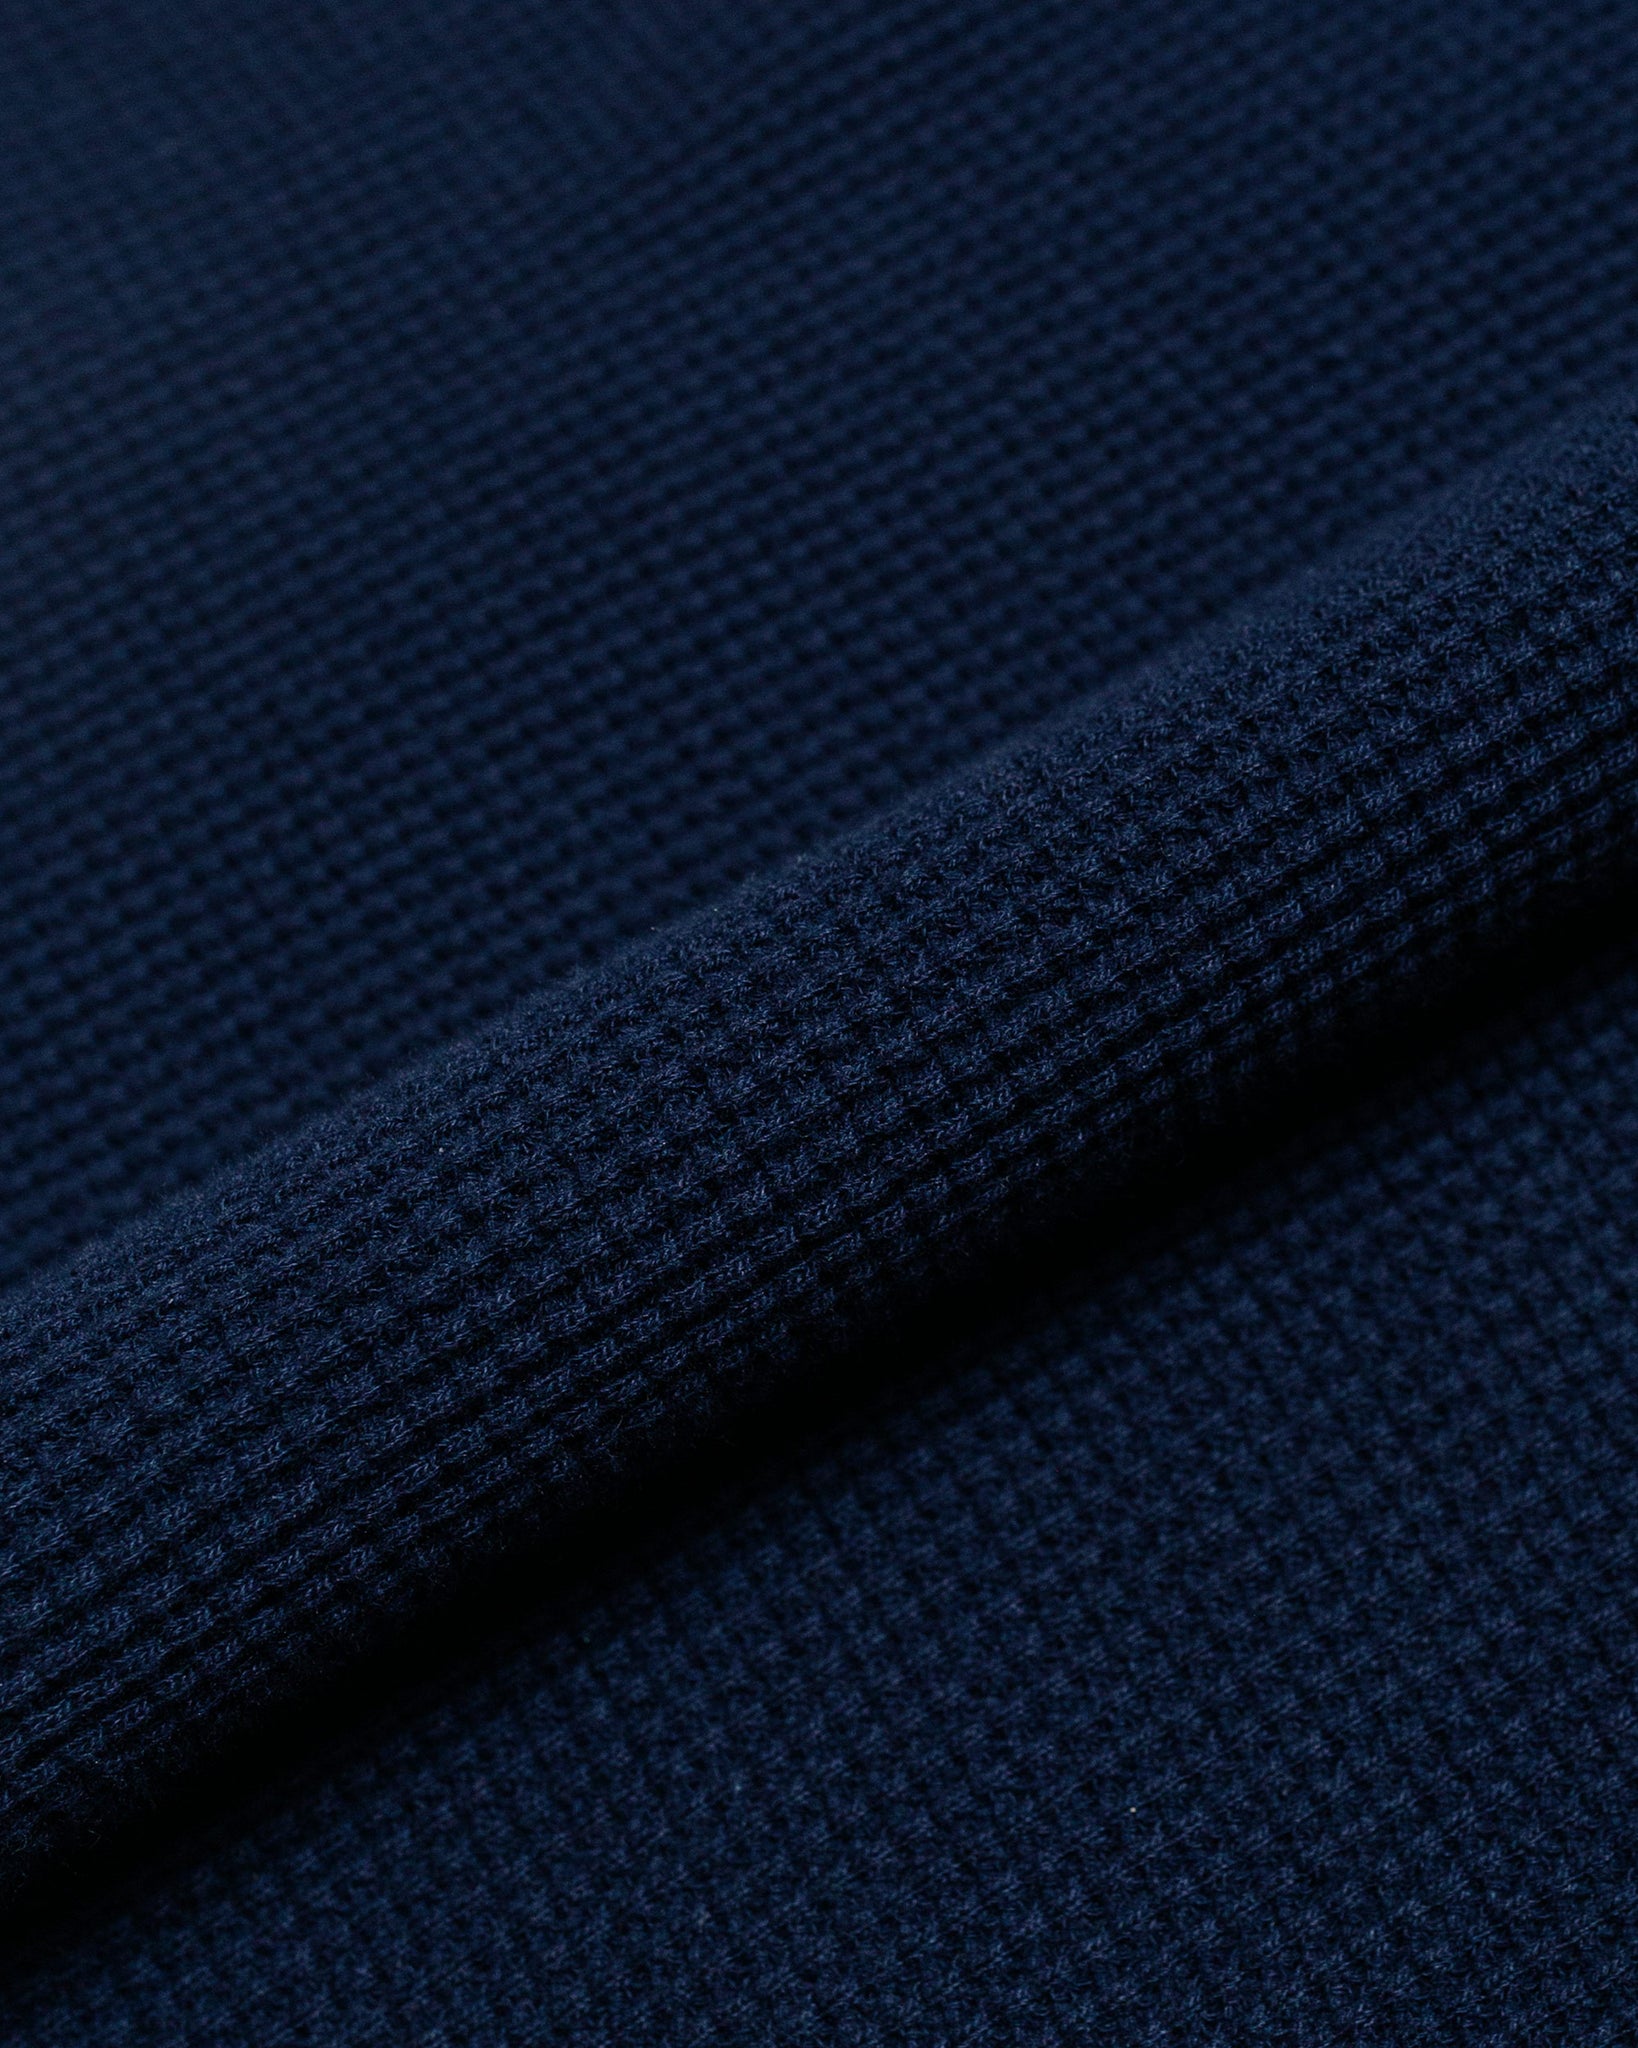 The Real McCoy's MC24018 Waffle Thermal Shirt SS Navy fabric